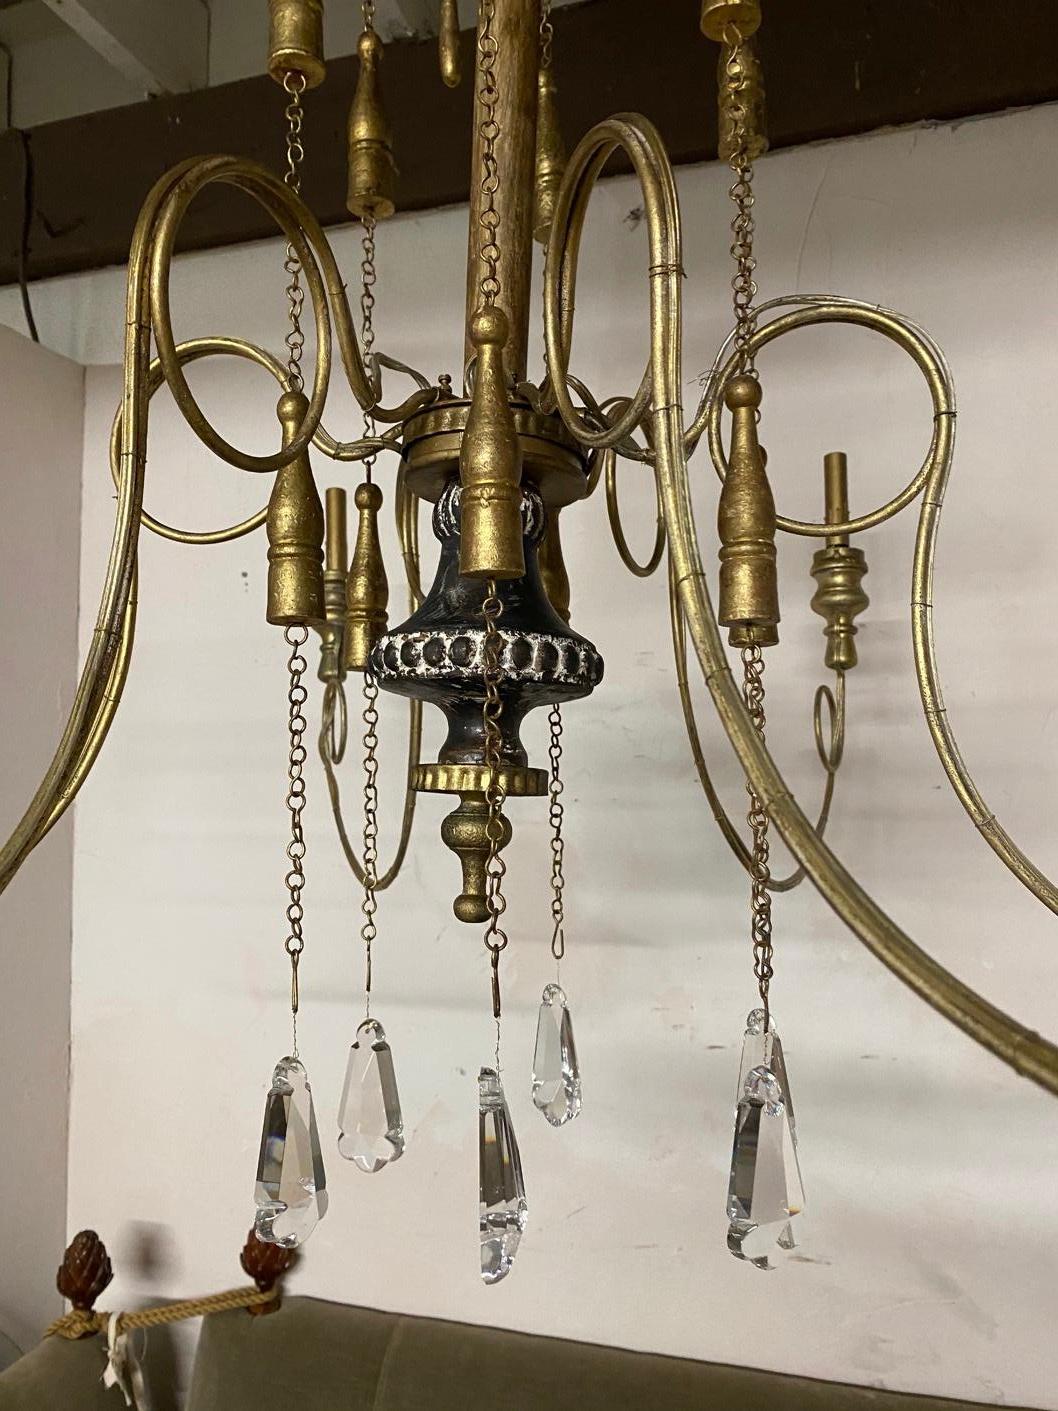 Large, elegant and impressive, newly restored antique Swedish Gustavian style chandelier with 6 scrolled arms and gold hanging wood and multifaceted crystal decorations. Elegant curved metal wired arms ending with candle holders wired for electric